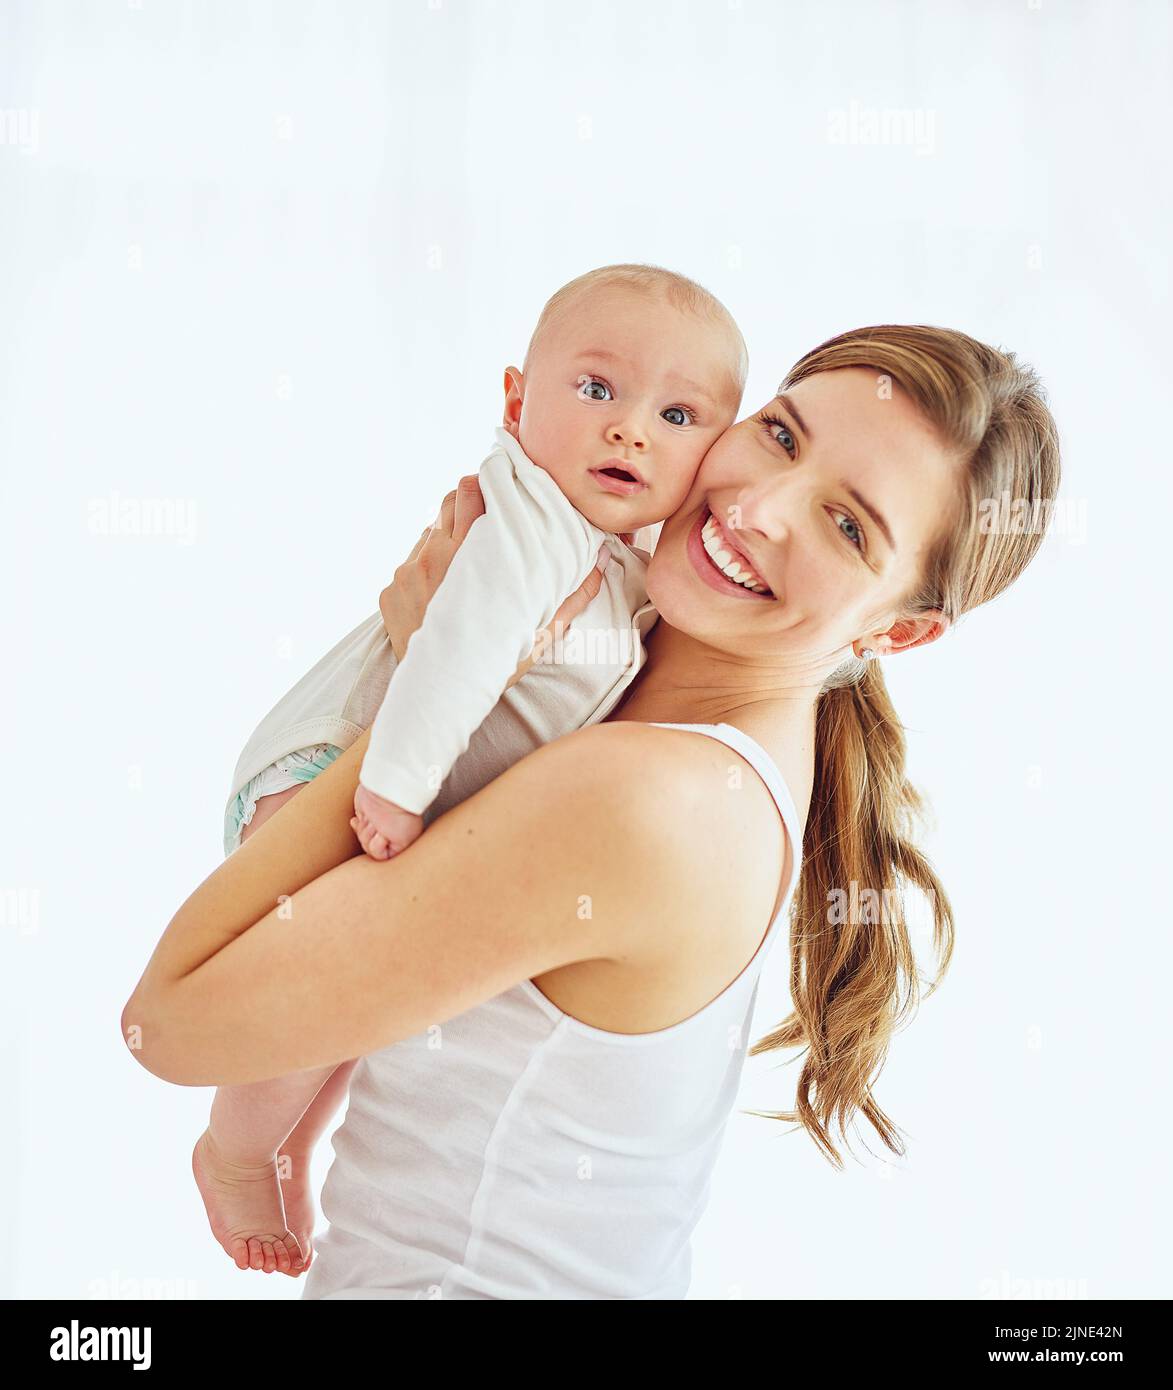 Portrait of a happy young mother hugging her cute baby boy at home, bonding and enjoying parenthood. Single parent being playful and affectionate Stock Photo